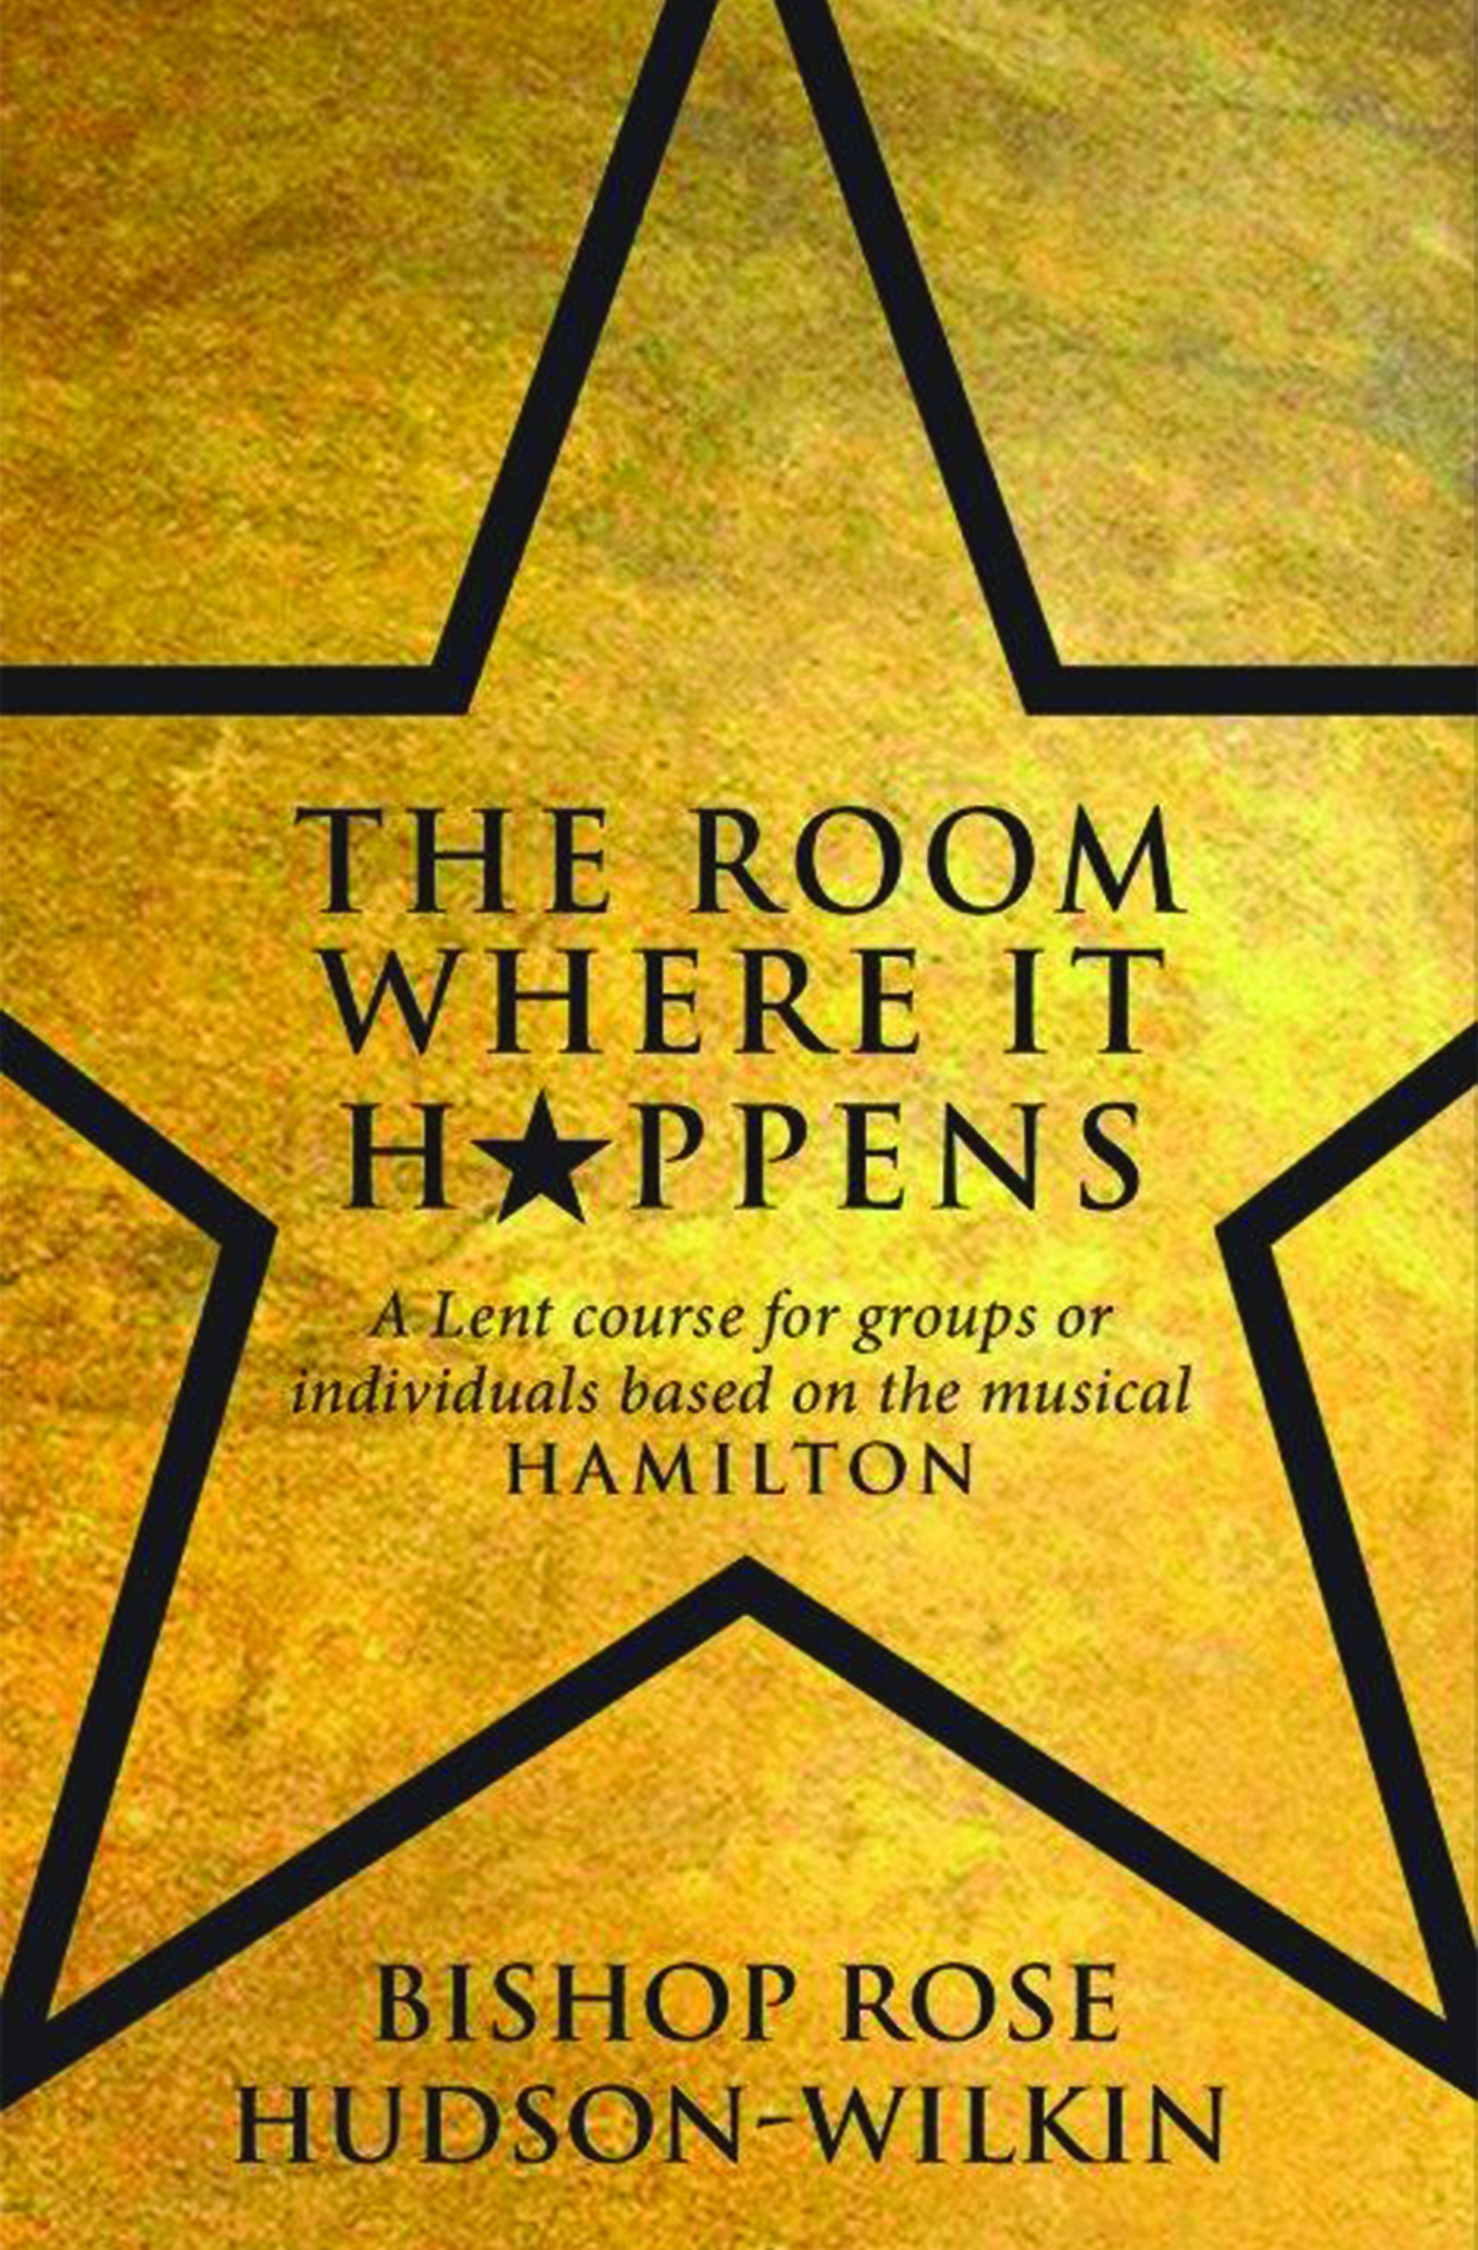 The Room Where It Happens